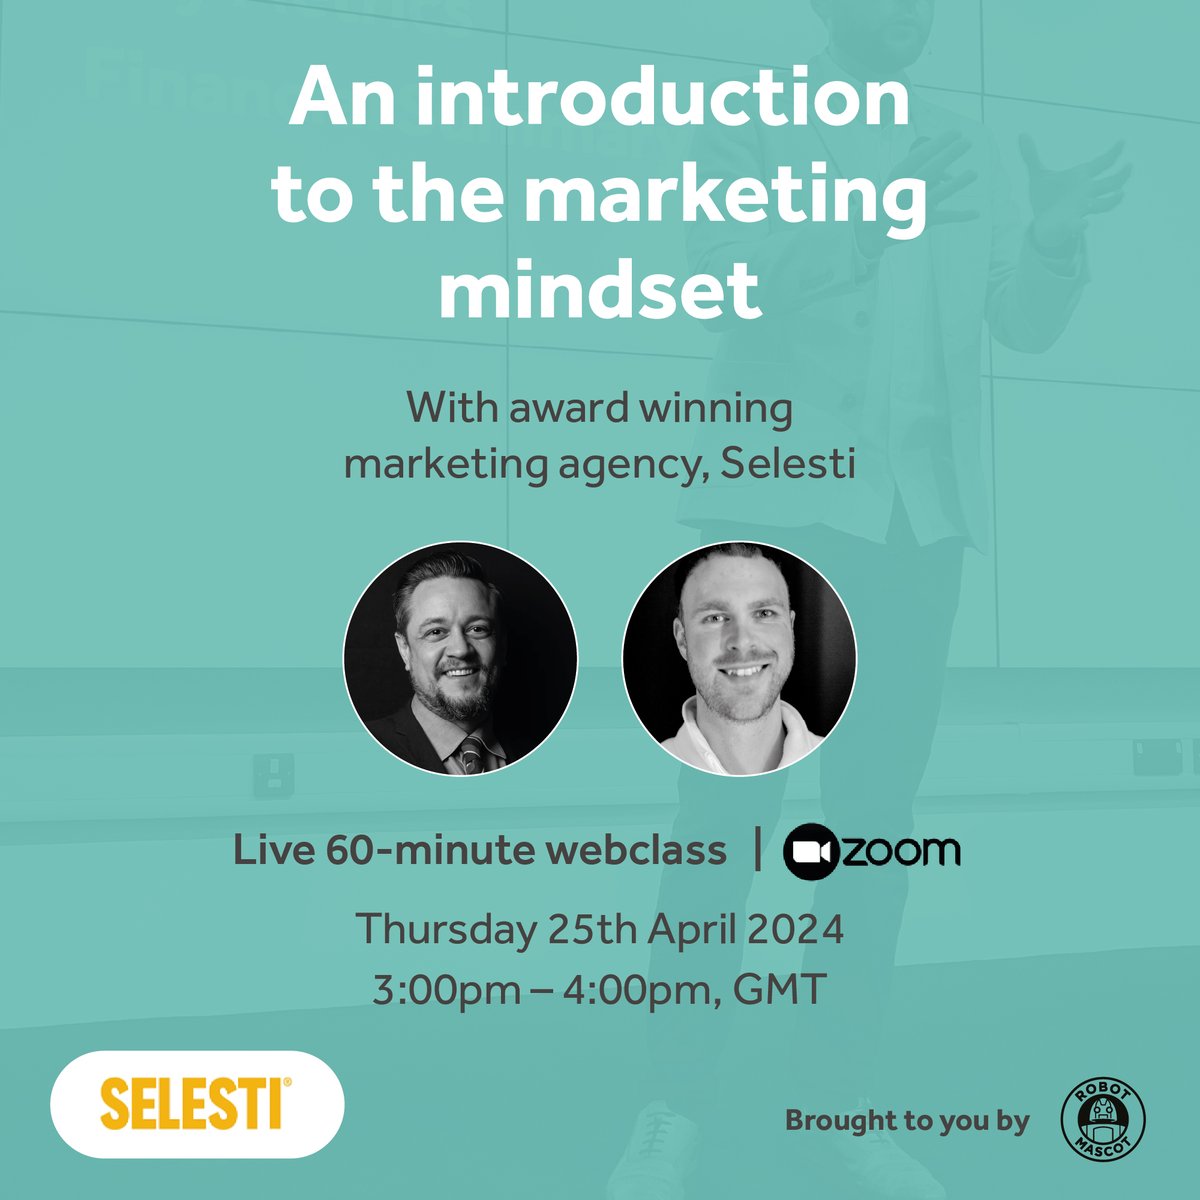 ⏰ Only 2 Weeks Left! ⏰

Unlock the secrets to success in our upcoming webinar, 'An Introduction to the Marketing Mindset' on April 25th at 3:00 pm 🗓️

Reserve your FREE spot today: robotmascot.co.uk/an-introductio…

#MarketingWebinar #GrowthStrategy #MarketingMindset